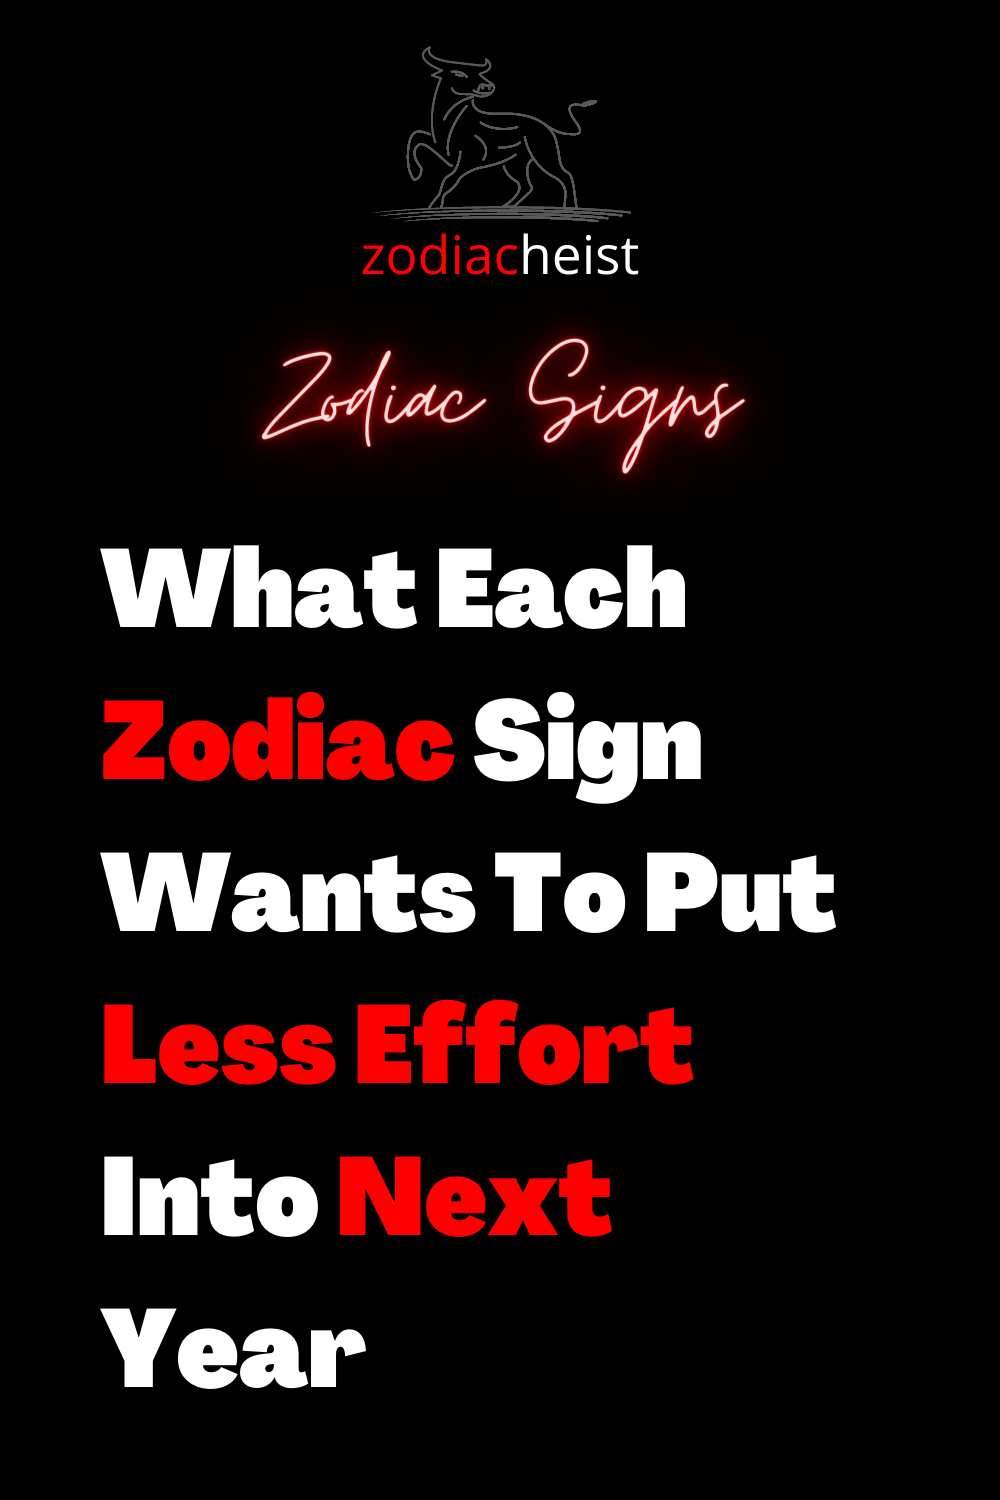 What Each Zodiac Sign Wants To Put Less Effort Into Next Year